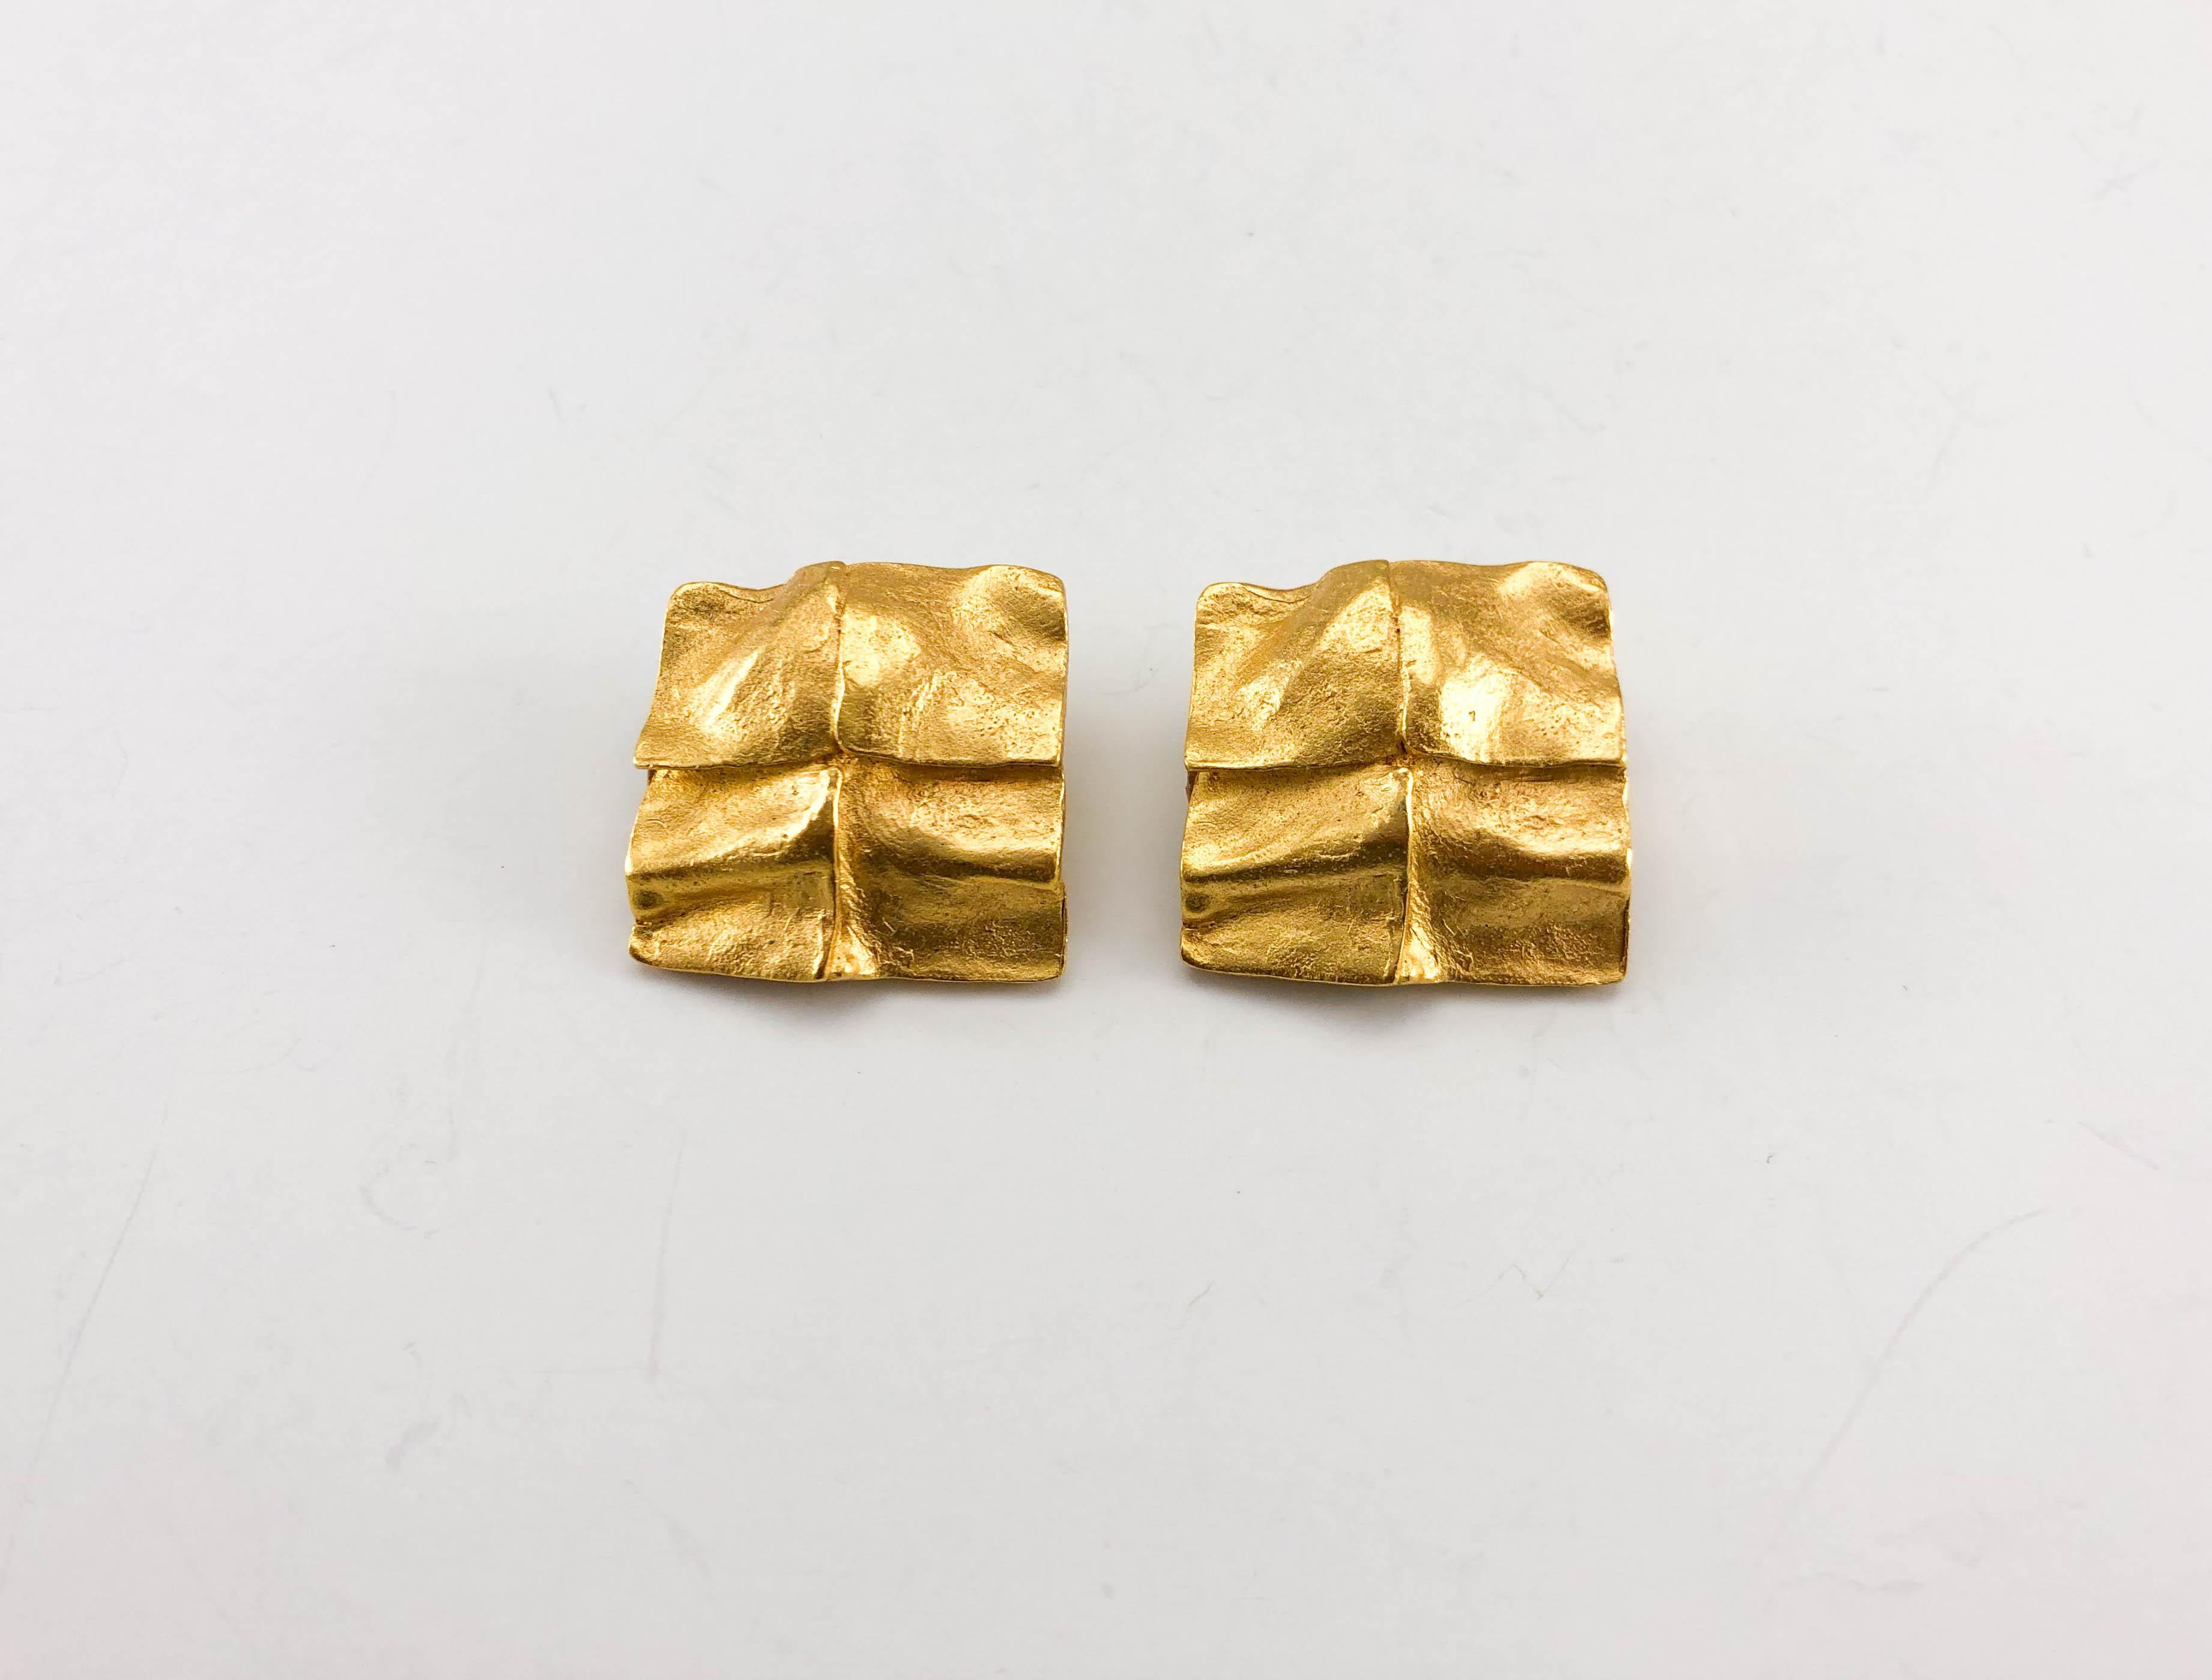 Vintage Yves Saint Laurent Gold-Plated Square Clip-on Earrings. These beautiful earrings by Yves Saint Laurent were created by Robert Goossens in the 1980’s. Made in gold-plated metal, the design resembles molten gold. YSL signed on the back. An